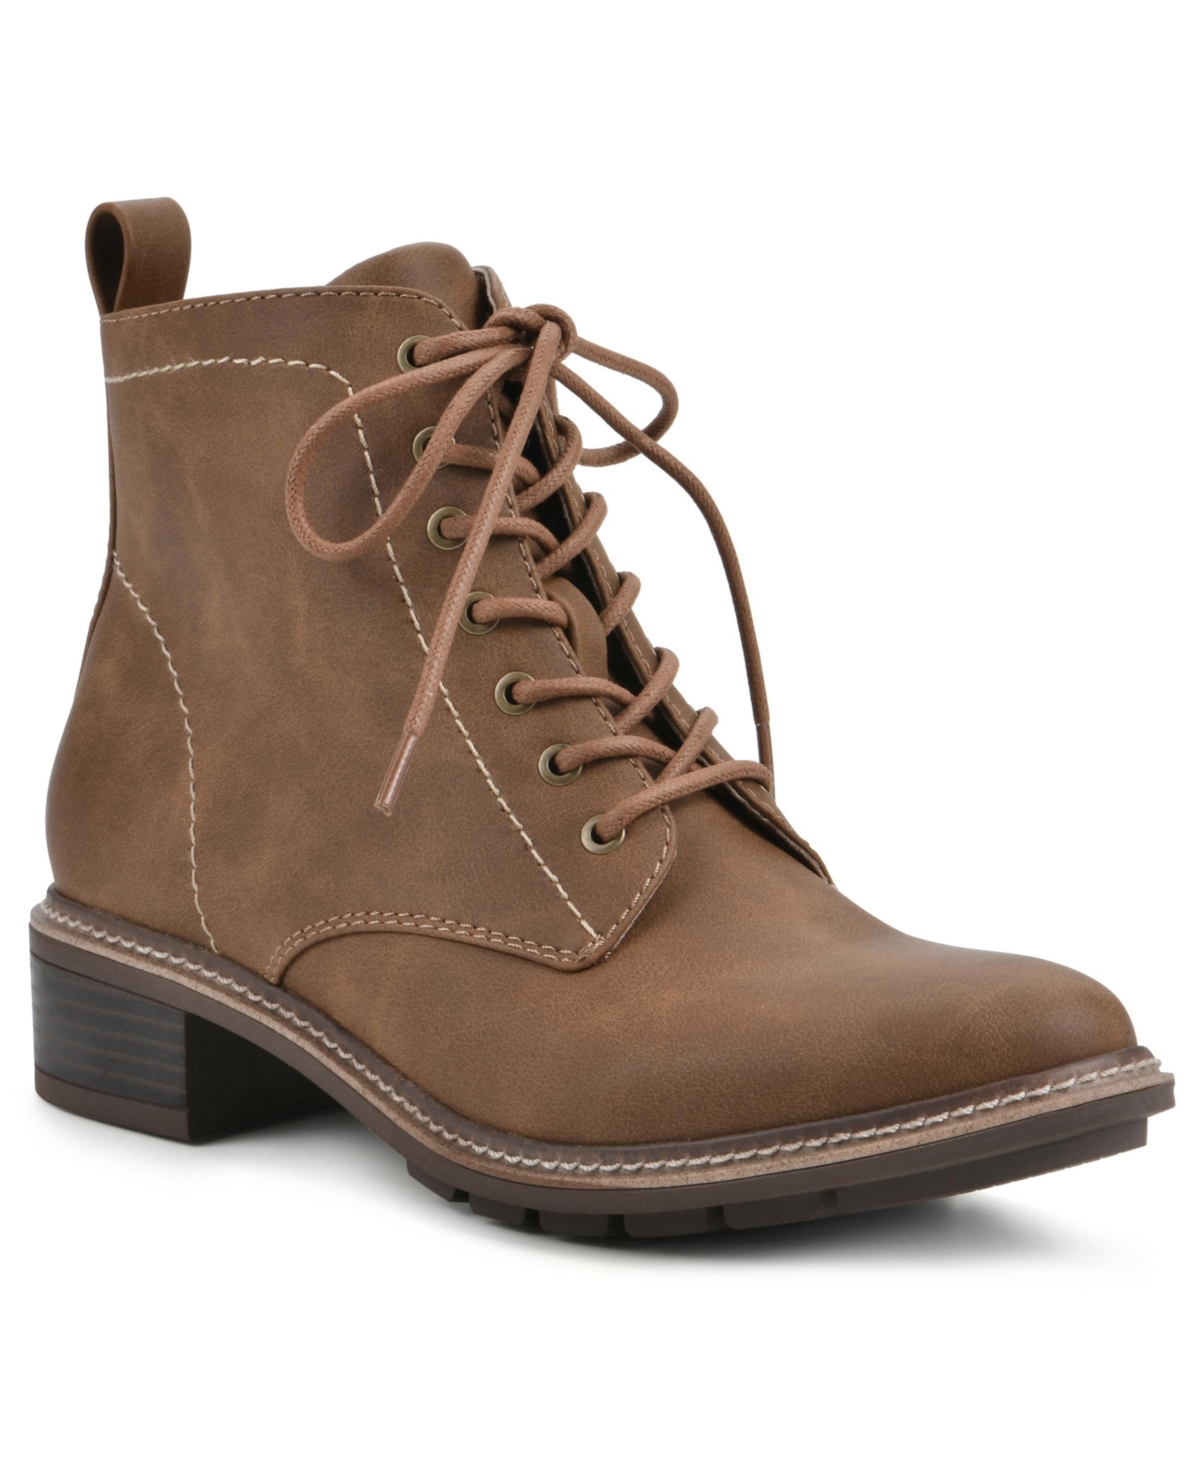 Women's Eligible Lace-up Boot - Tan, Nubuck